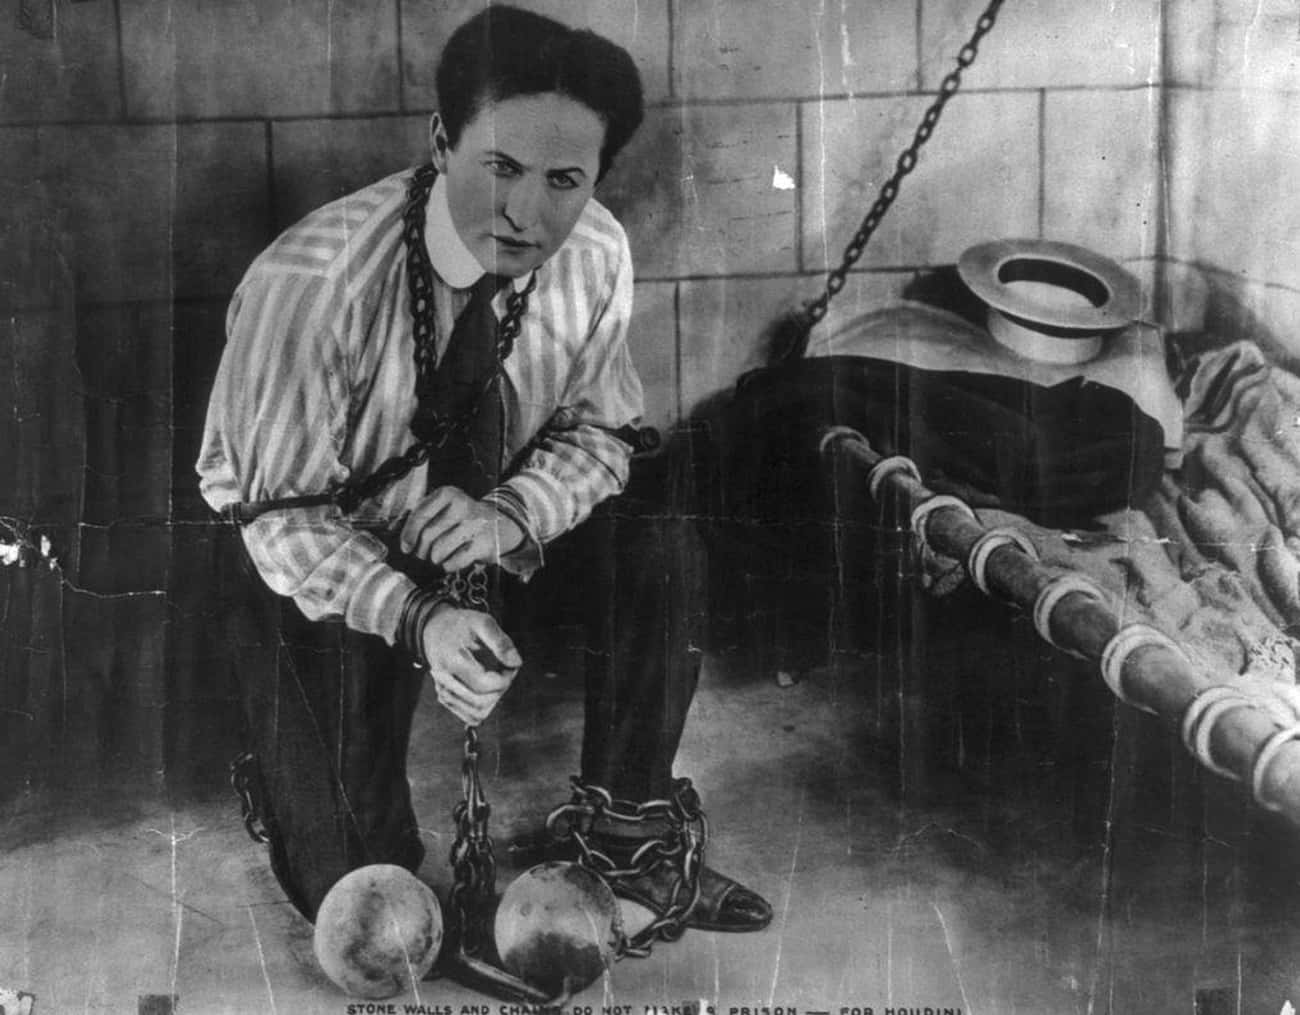 The Houdini Séance Room Is Filled With Spirits